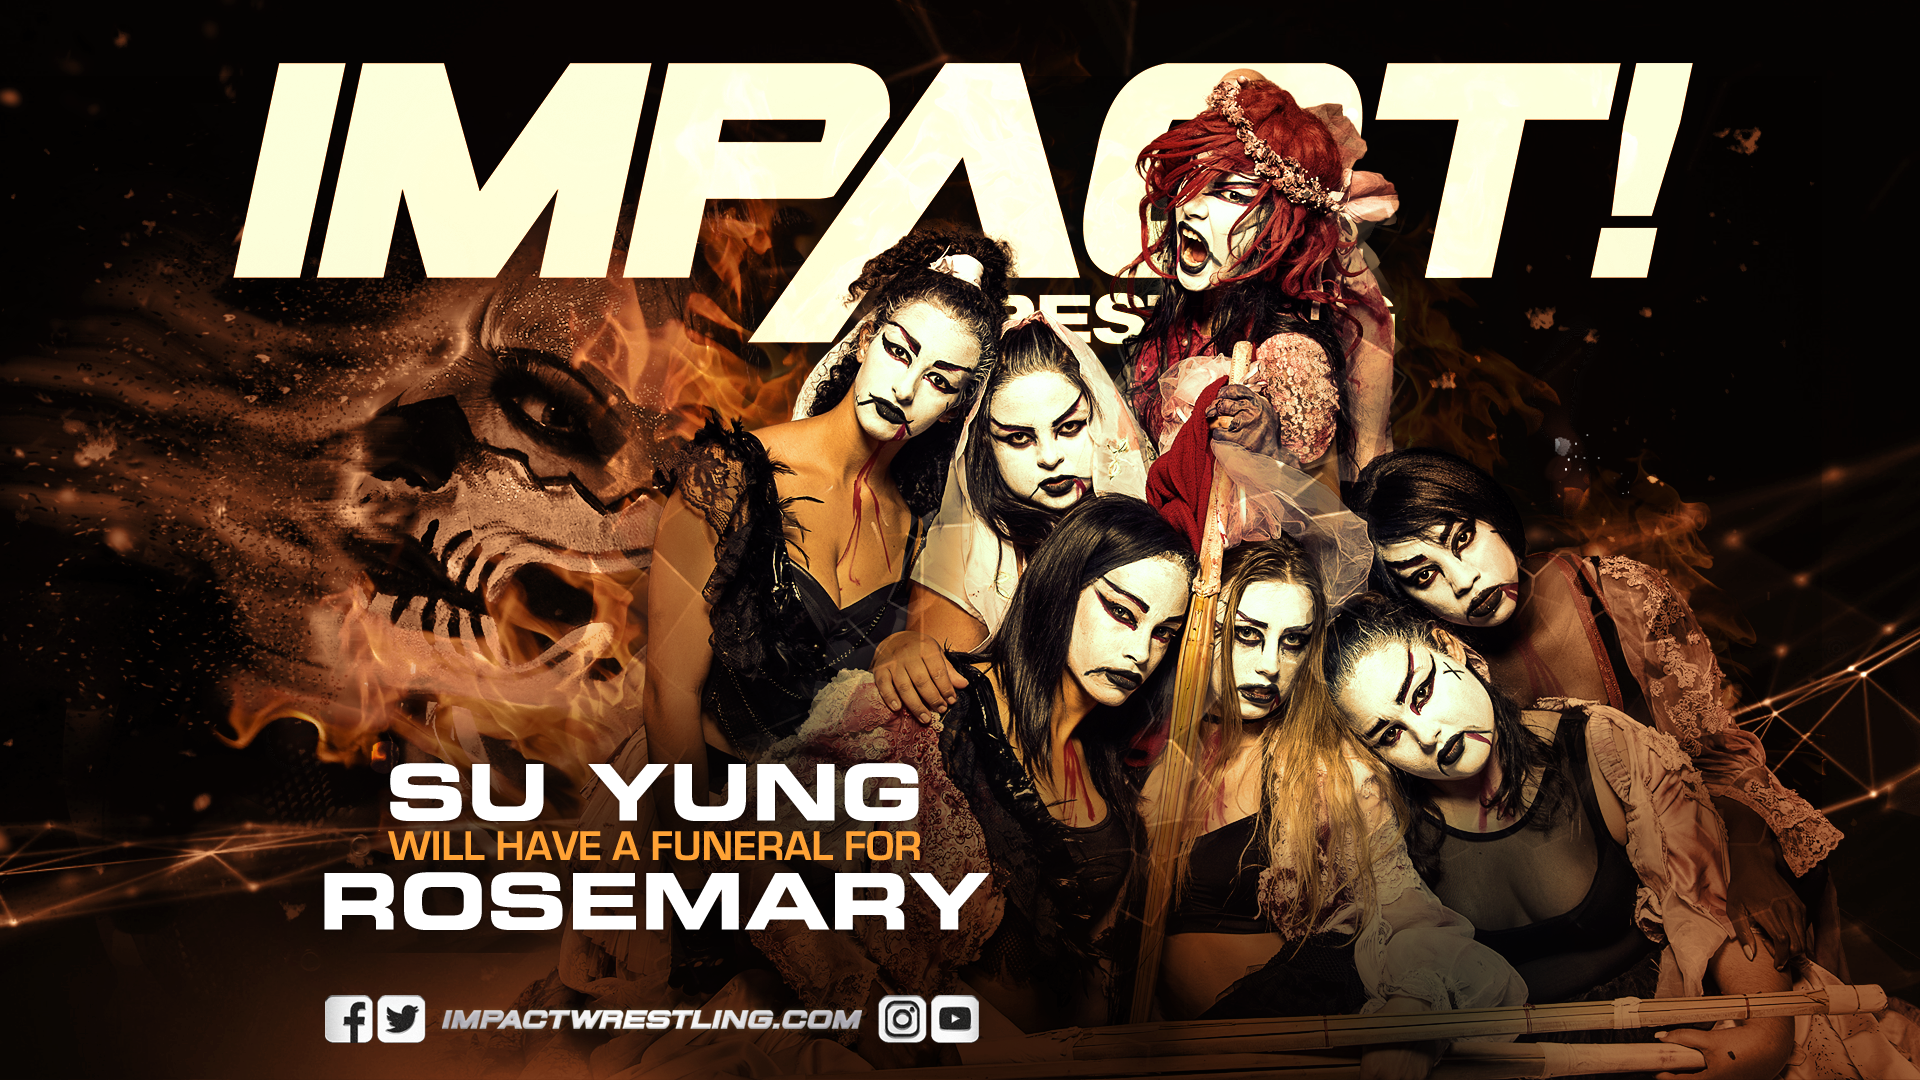 Impact Wrestling Preview